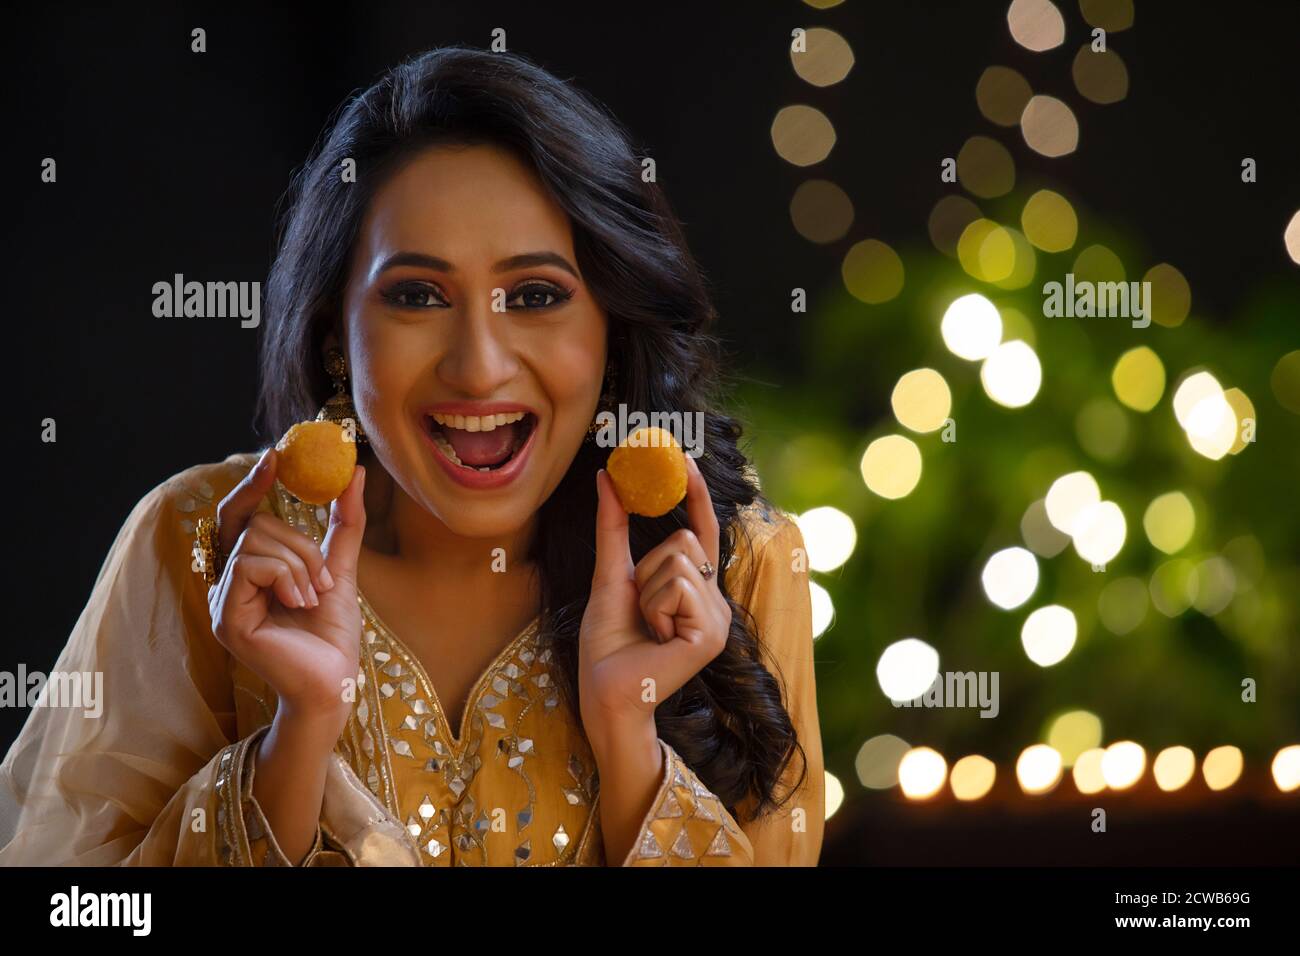 Woman smiling with ladoos in her hands on the occasion of Diwali Stock Photo